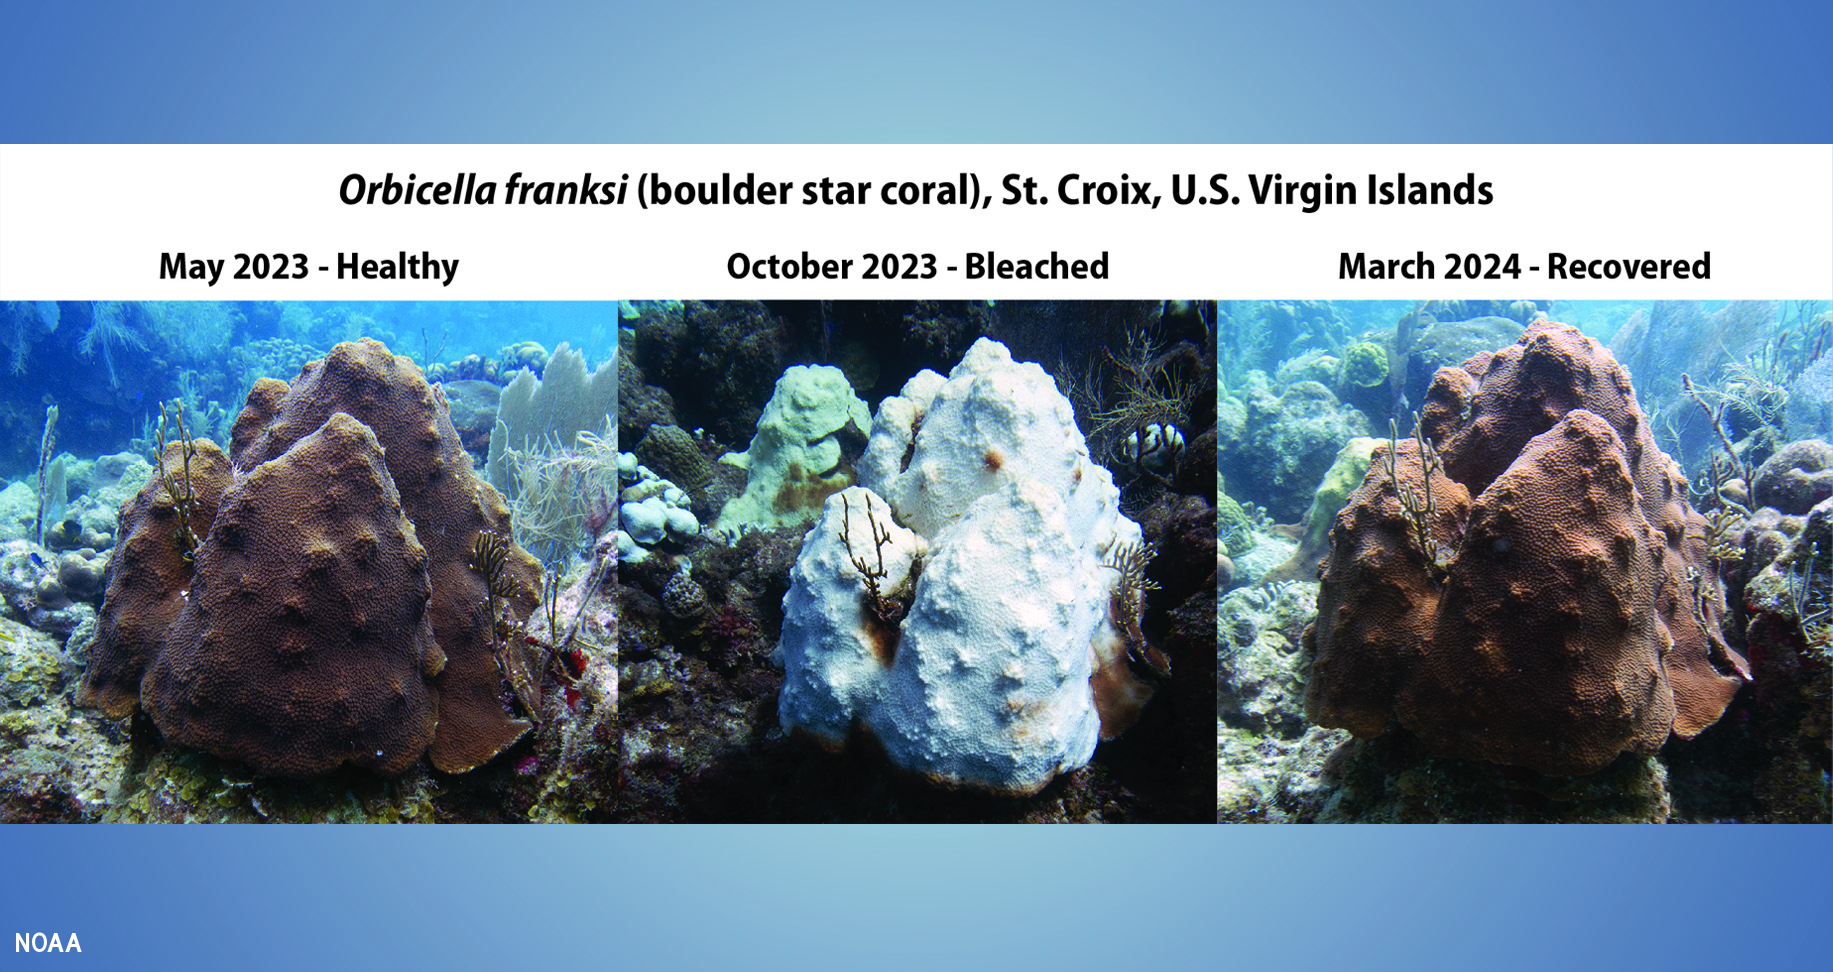 Boulder star coral in Caribbean healthy, bleached, and recovered